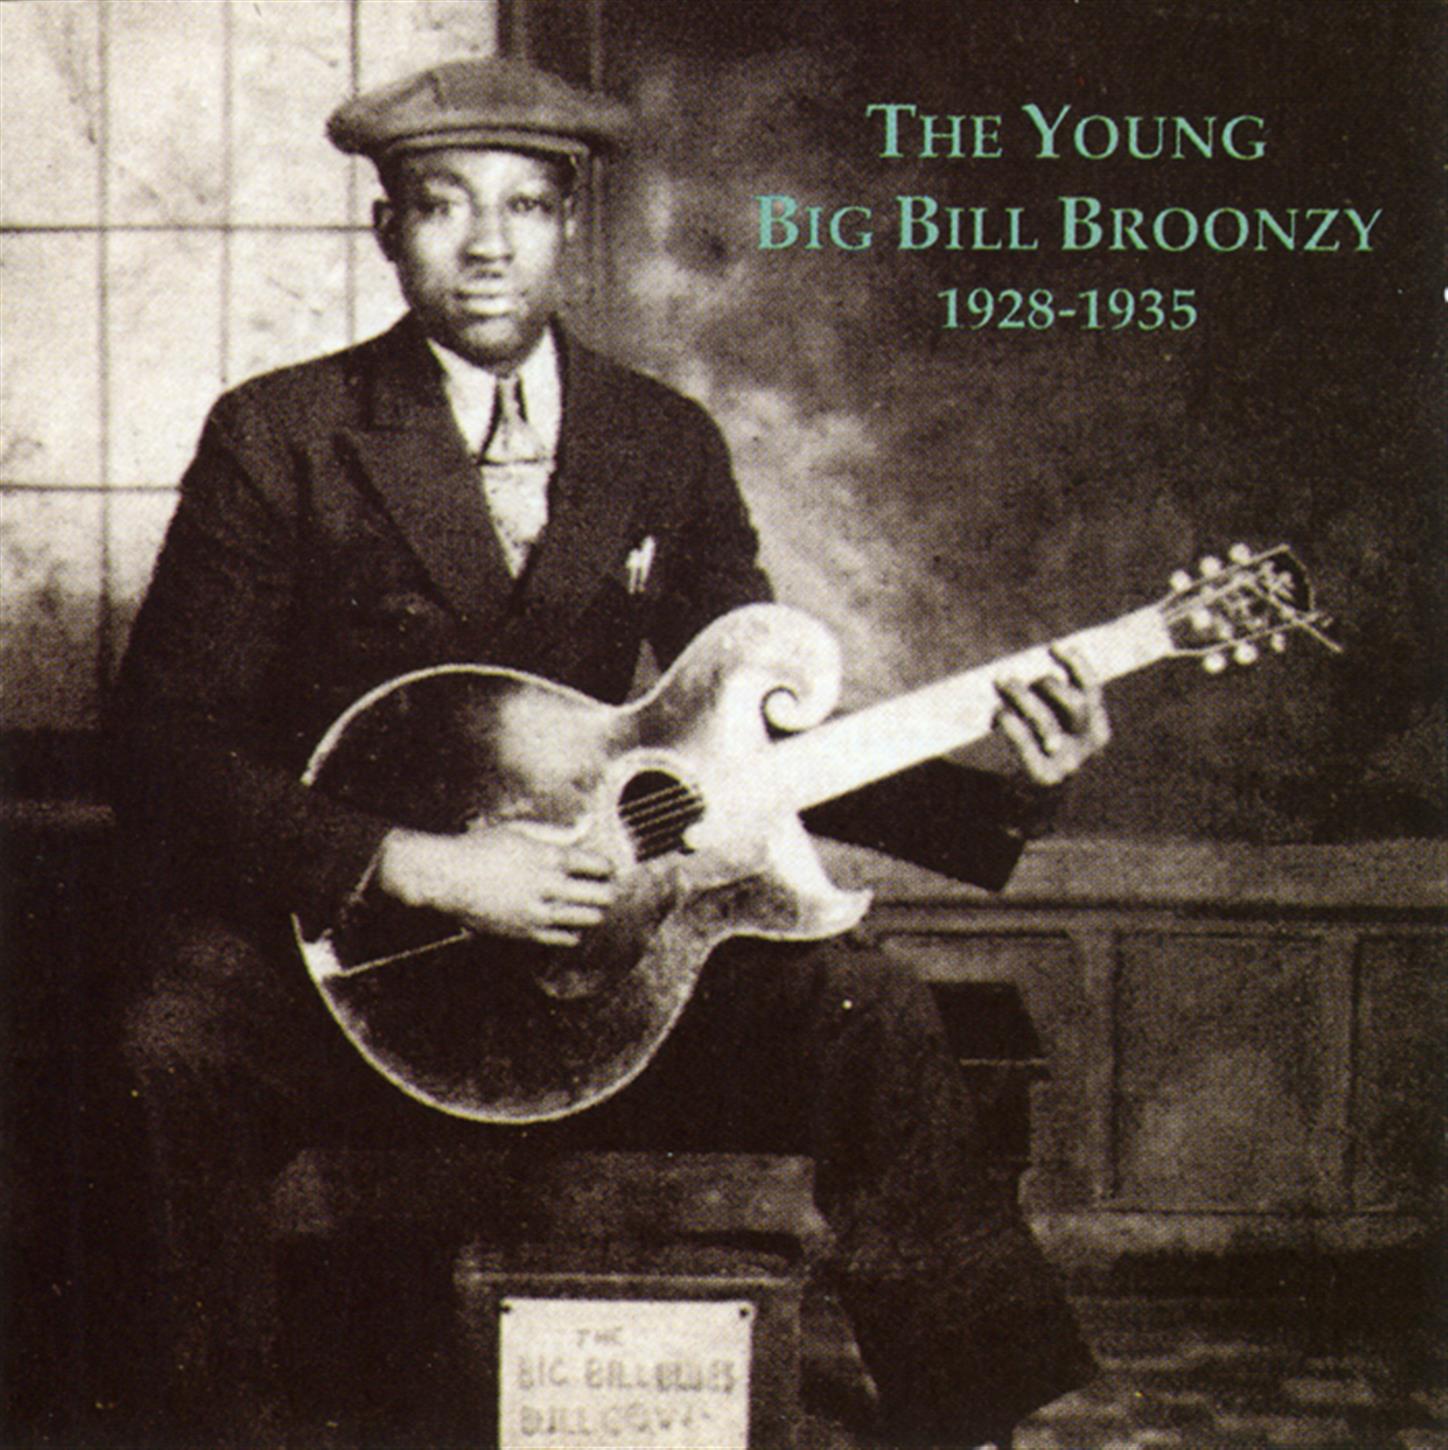 The Young Big Bill Broonzy